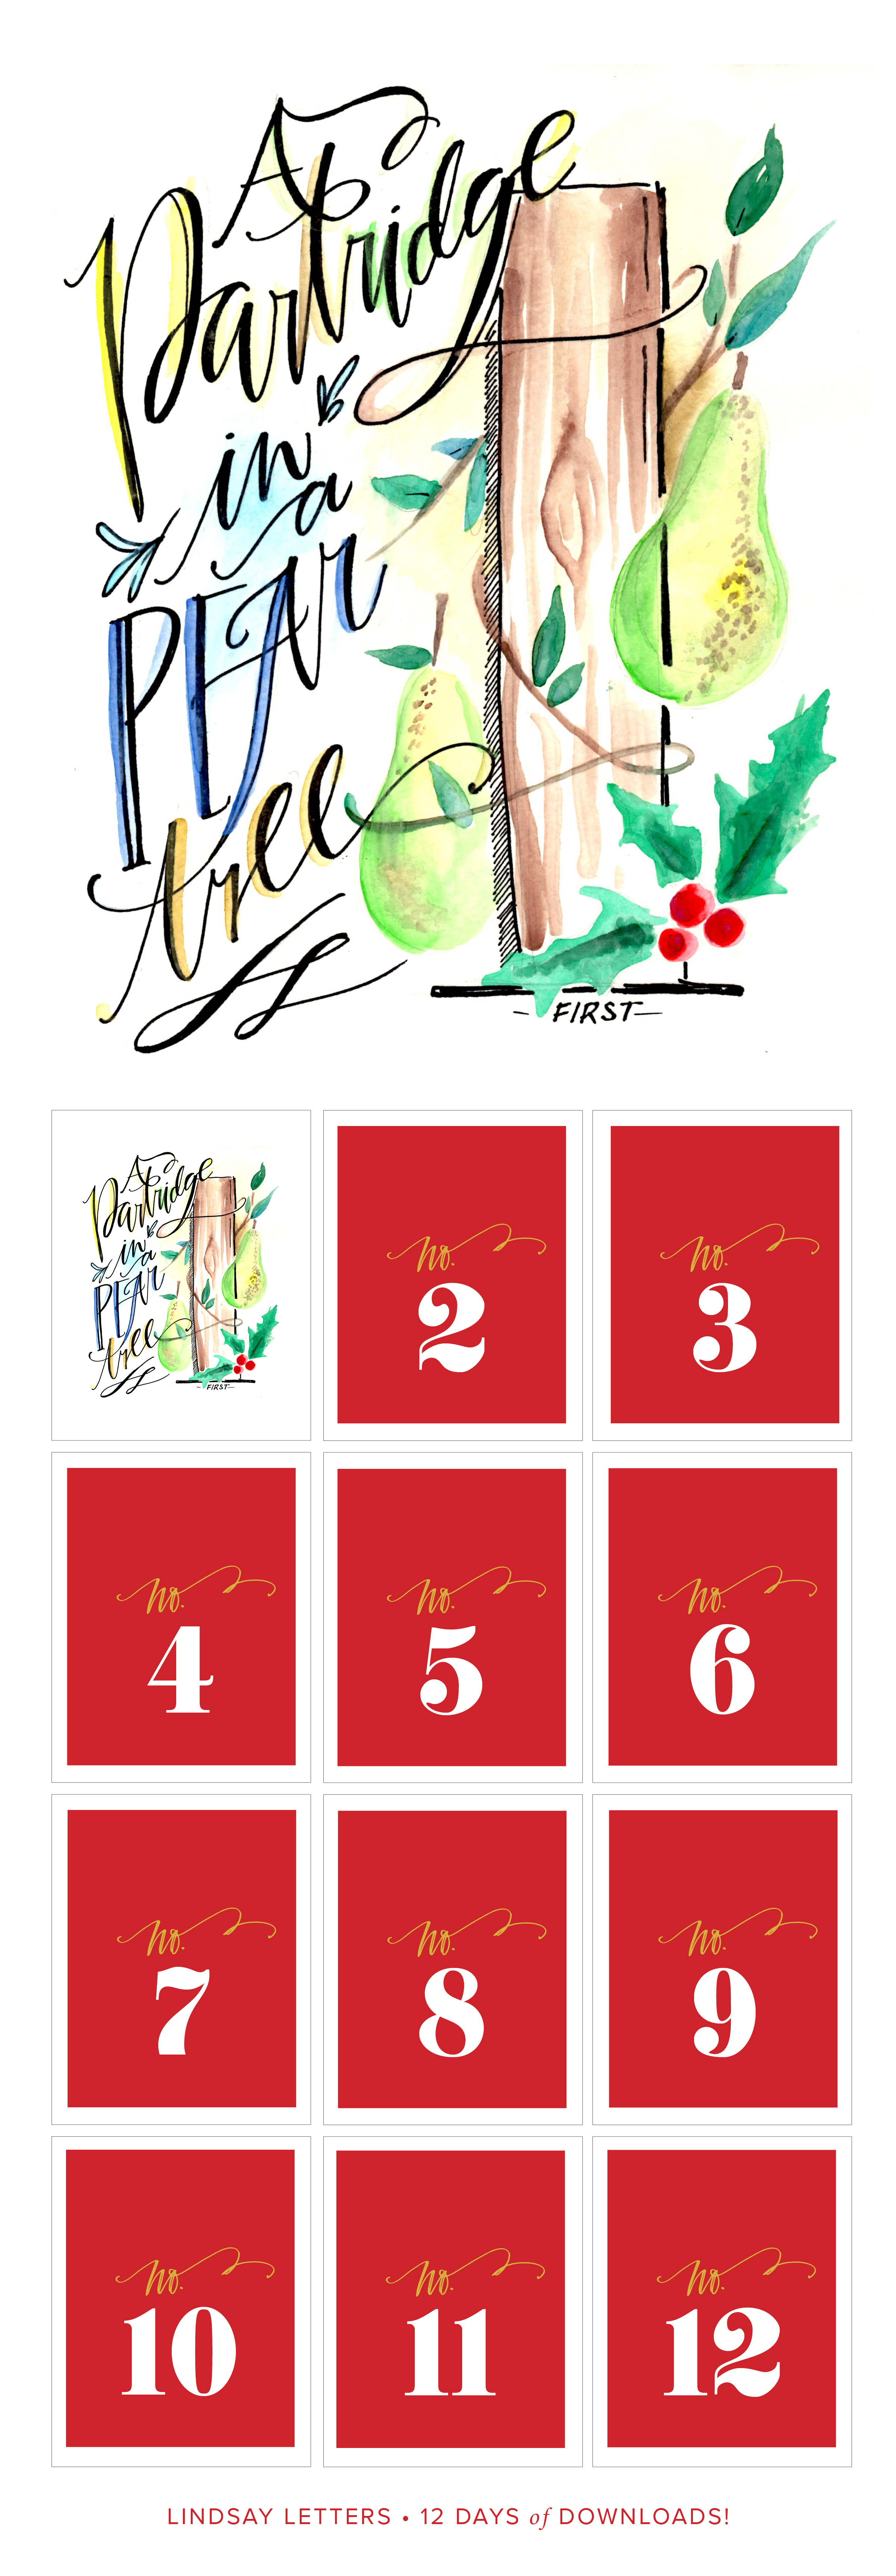 12 Days of Downloads - Day 1!